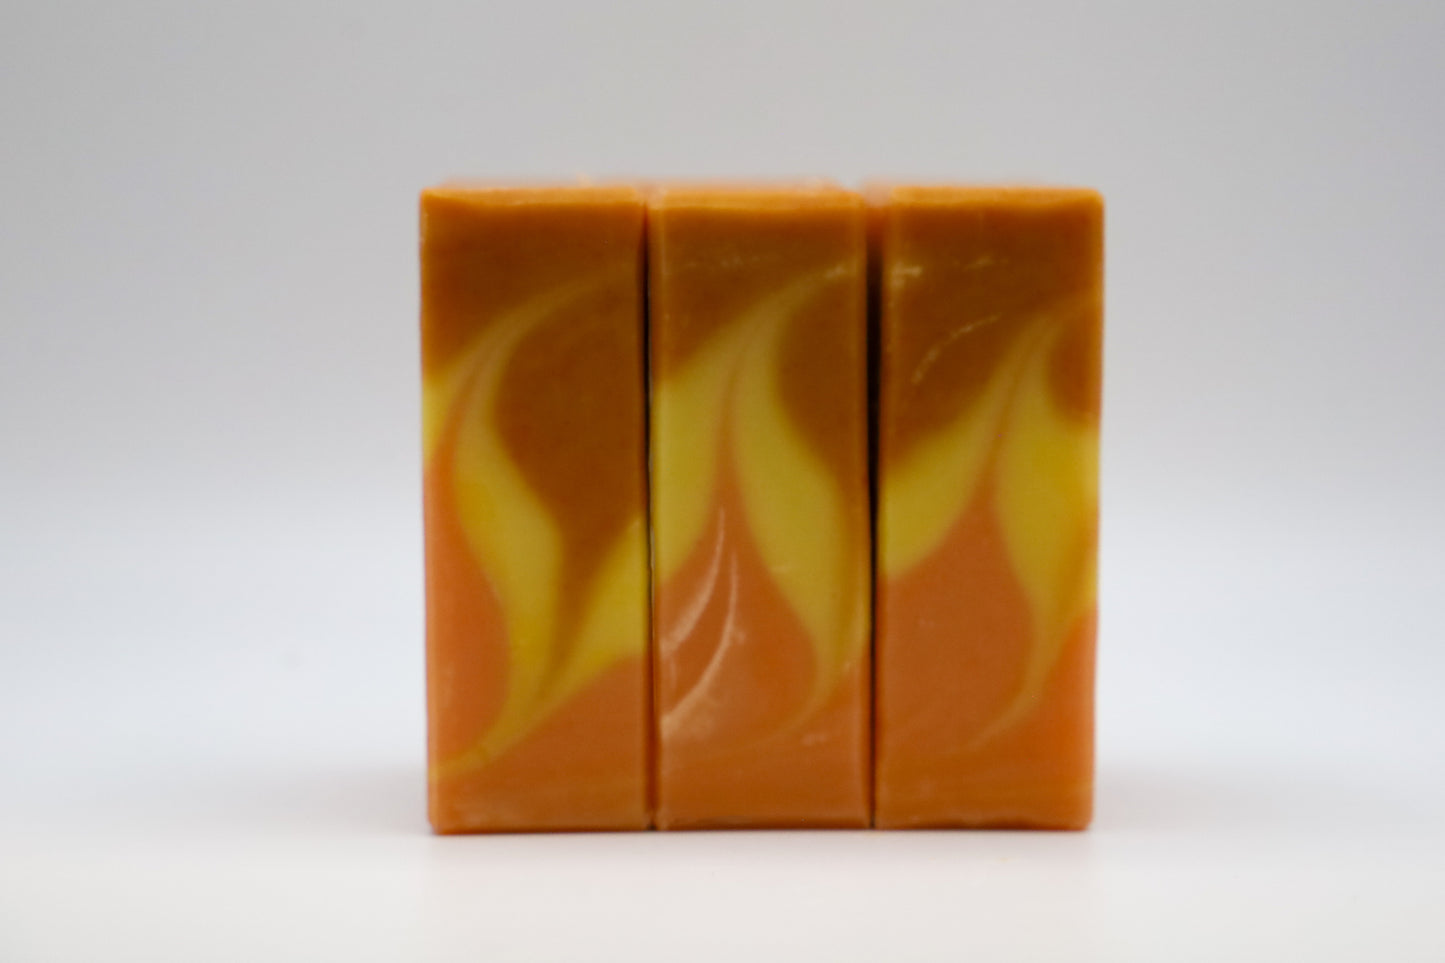 Bonfire scented soap with orange yellow swirled flame patten